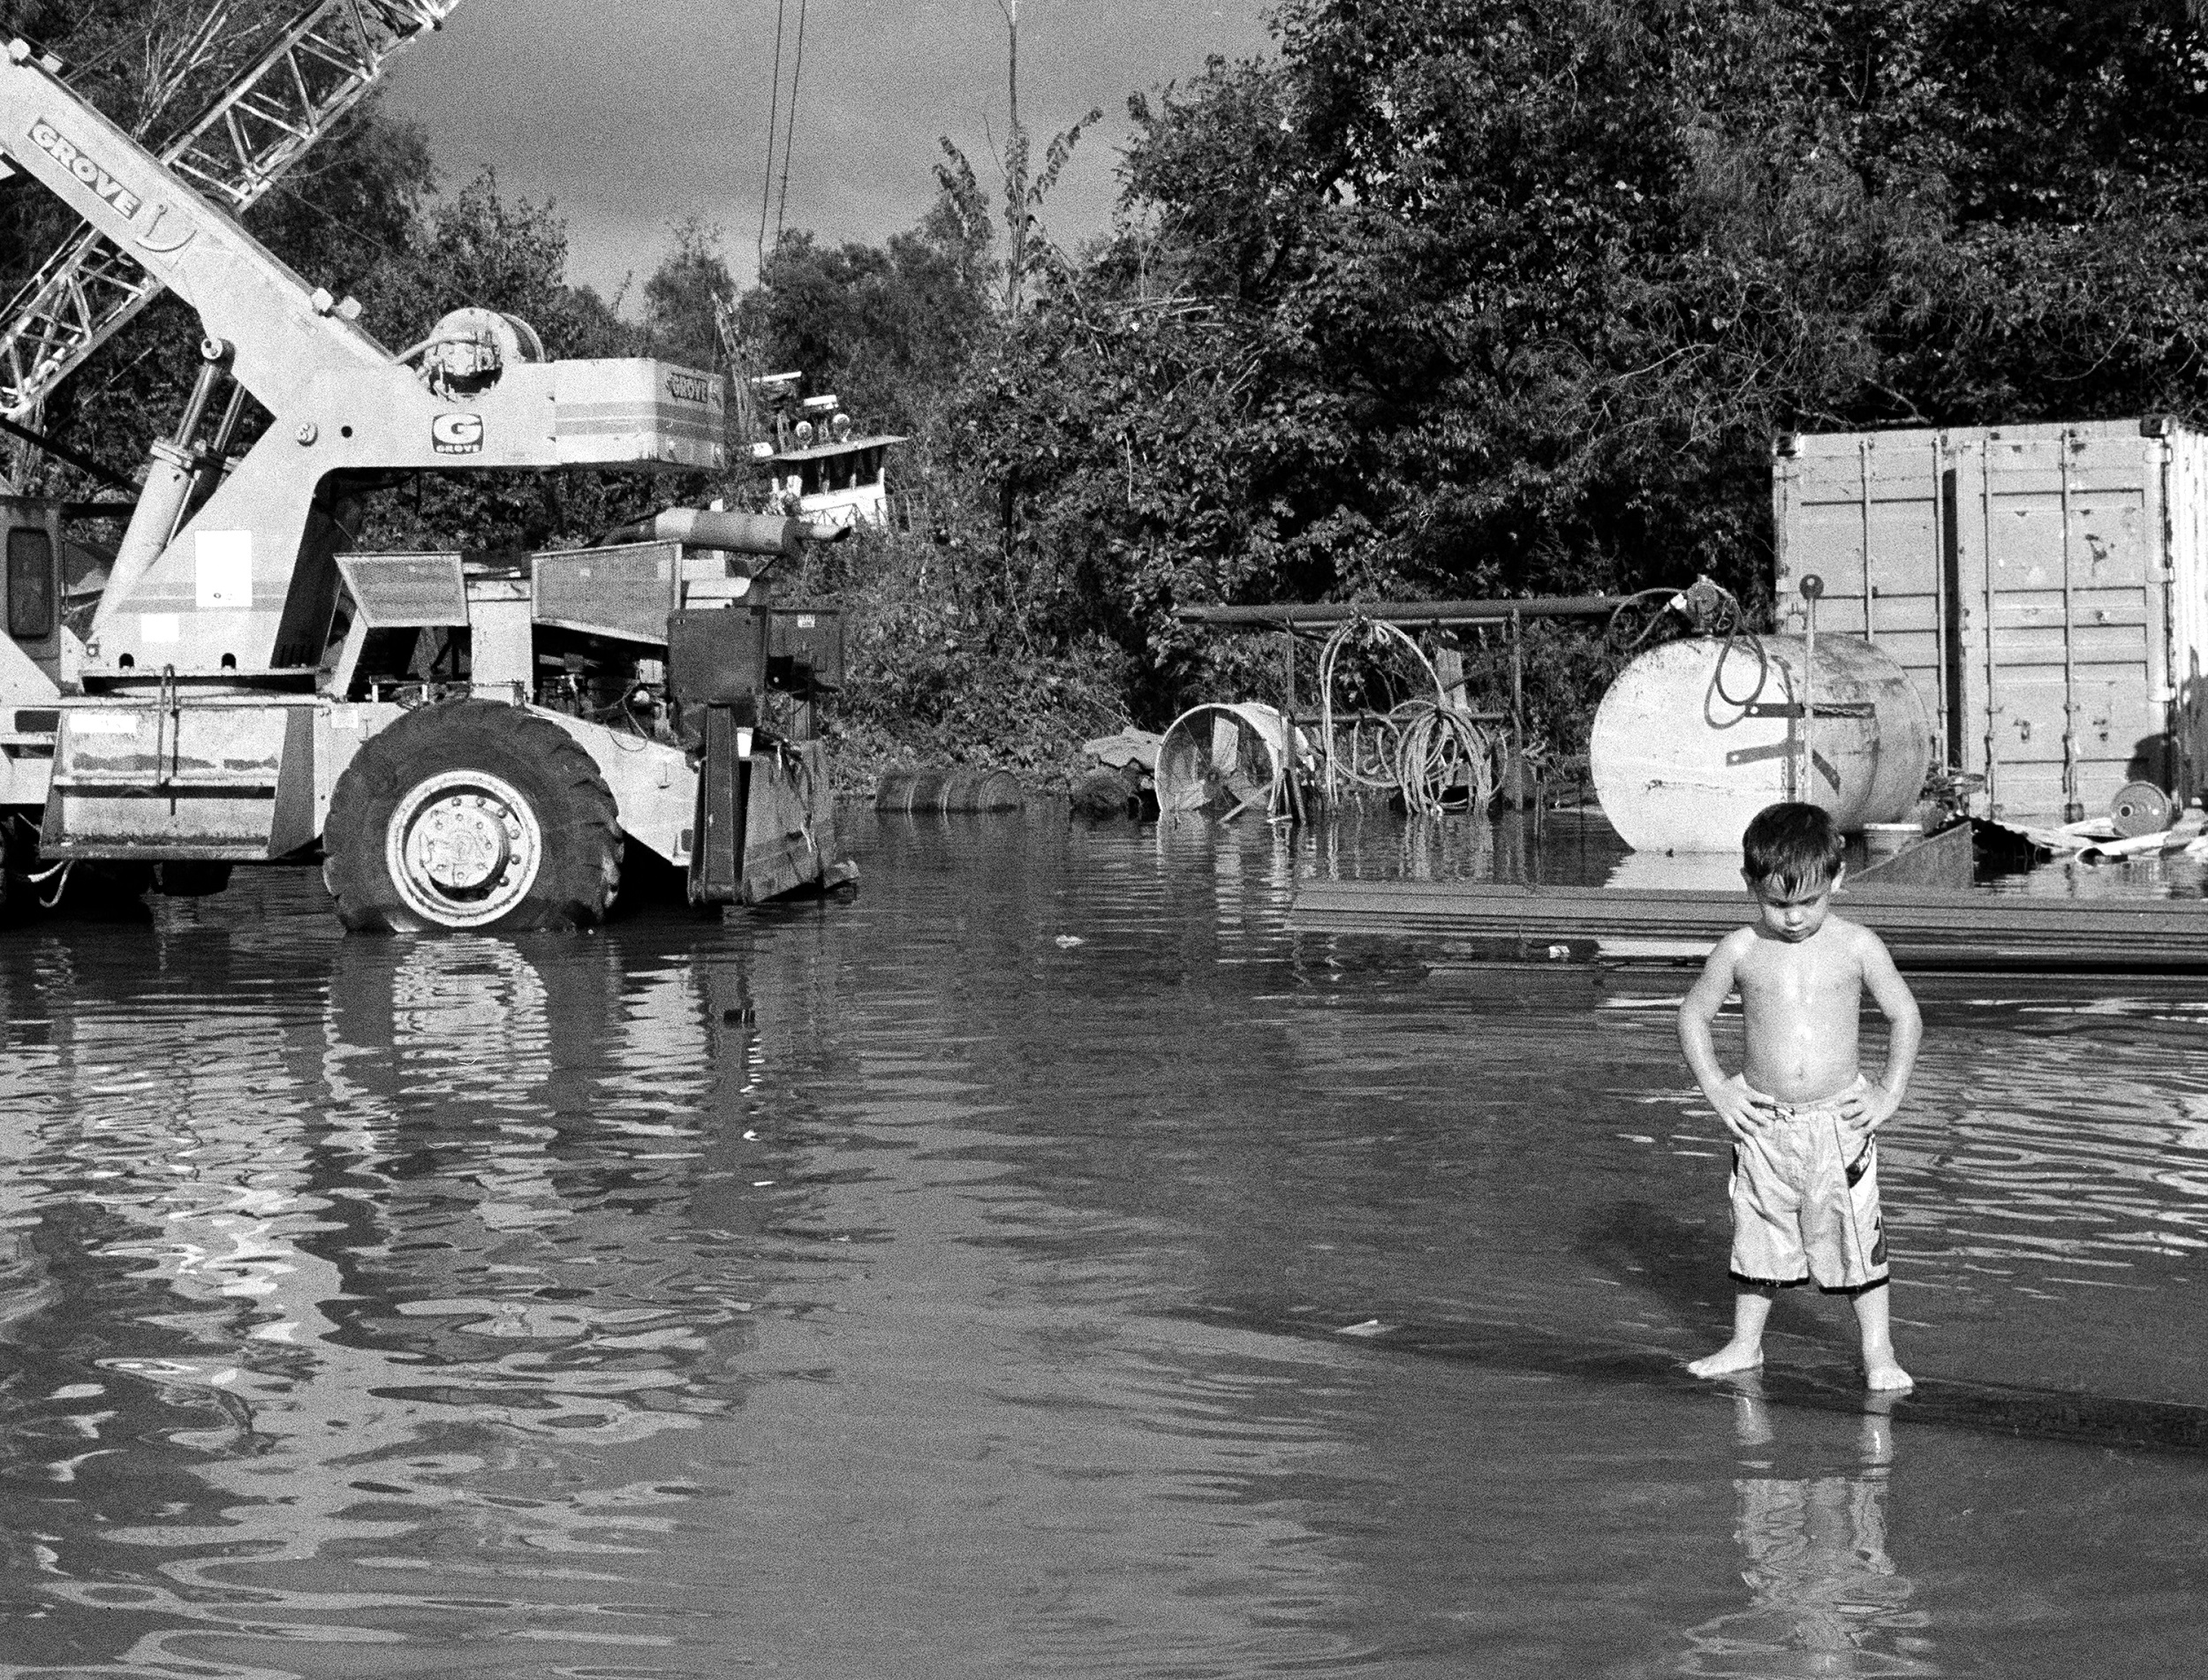 Black-and-white photograph of a young boy in shorts standing in a large puddle, posing in front of a construction vehicle